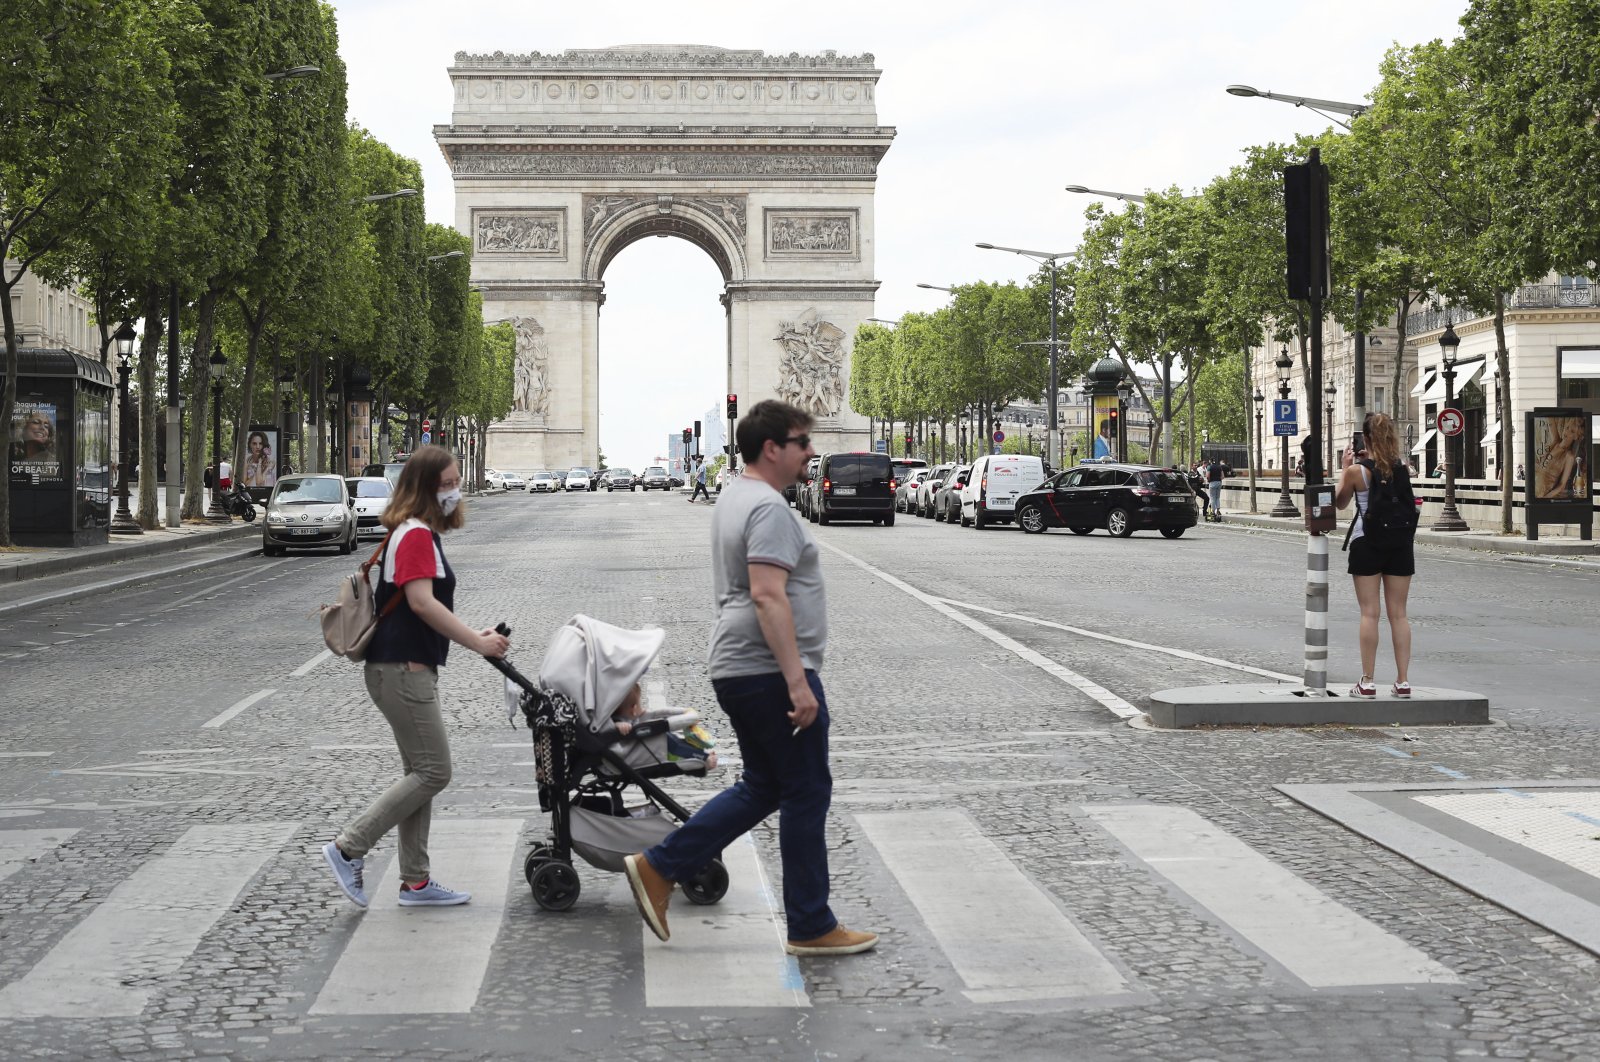 People stroll on the Champs Elysees avenue in Paris, France, June 3, 2020. (AP Photo)